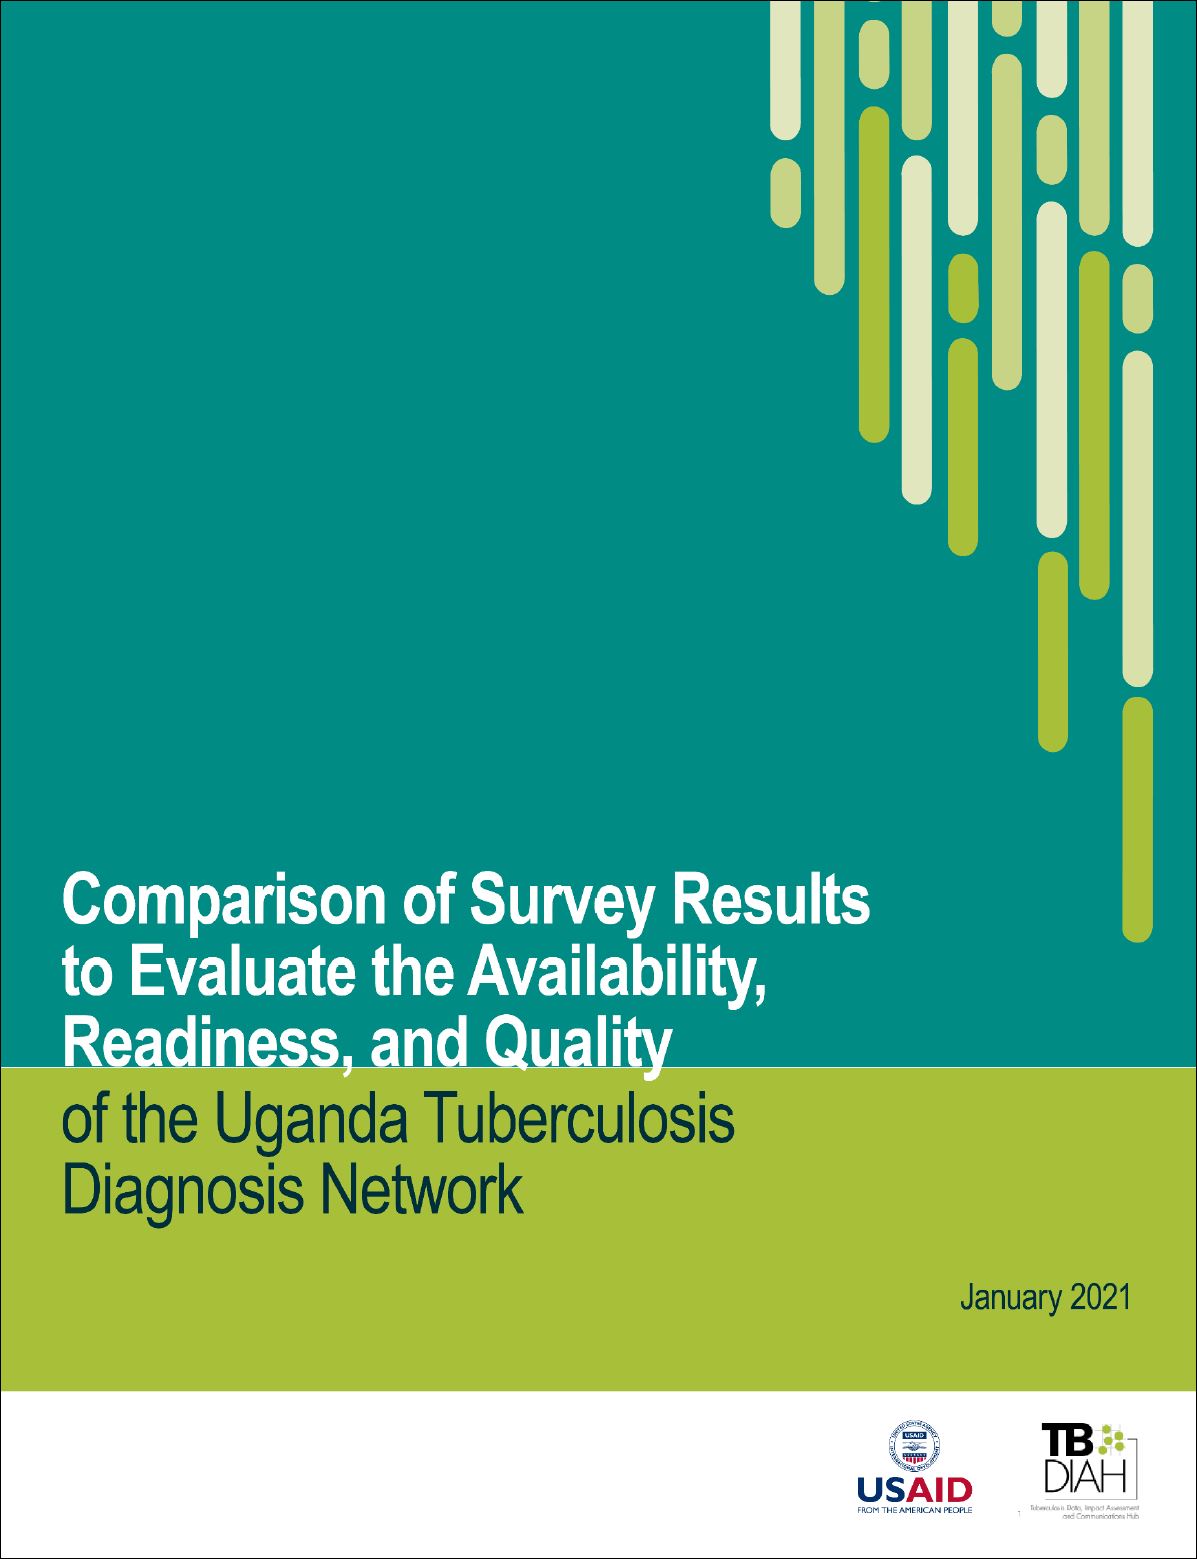 Comparison of Survey Results to Evaluate the Availability, Readiness, and Quality of the Uganda Tuberculosis Diagnosis Network